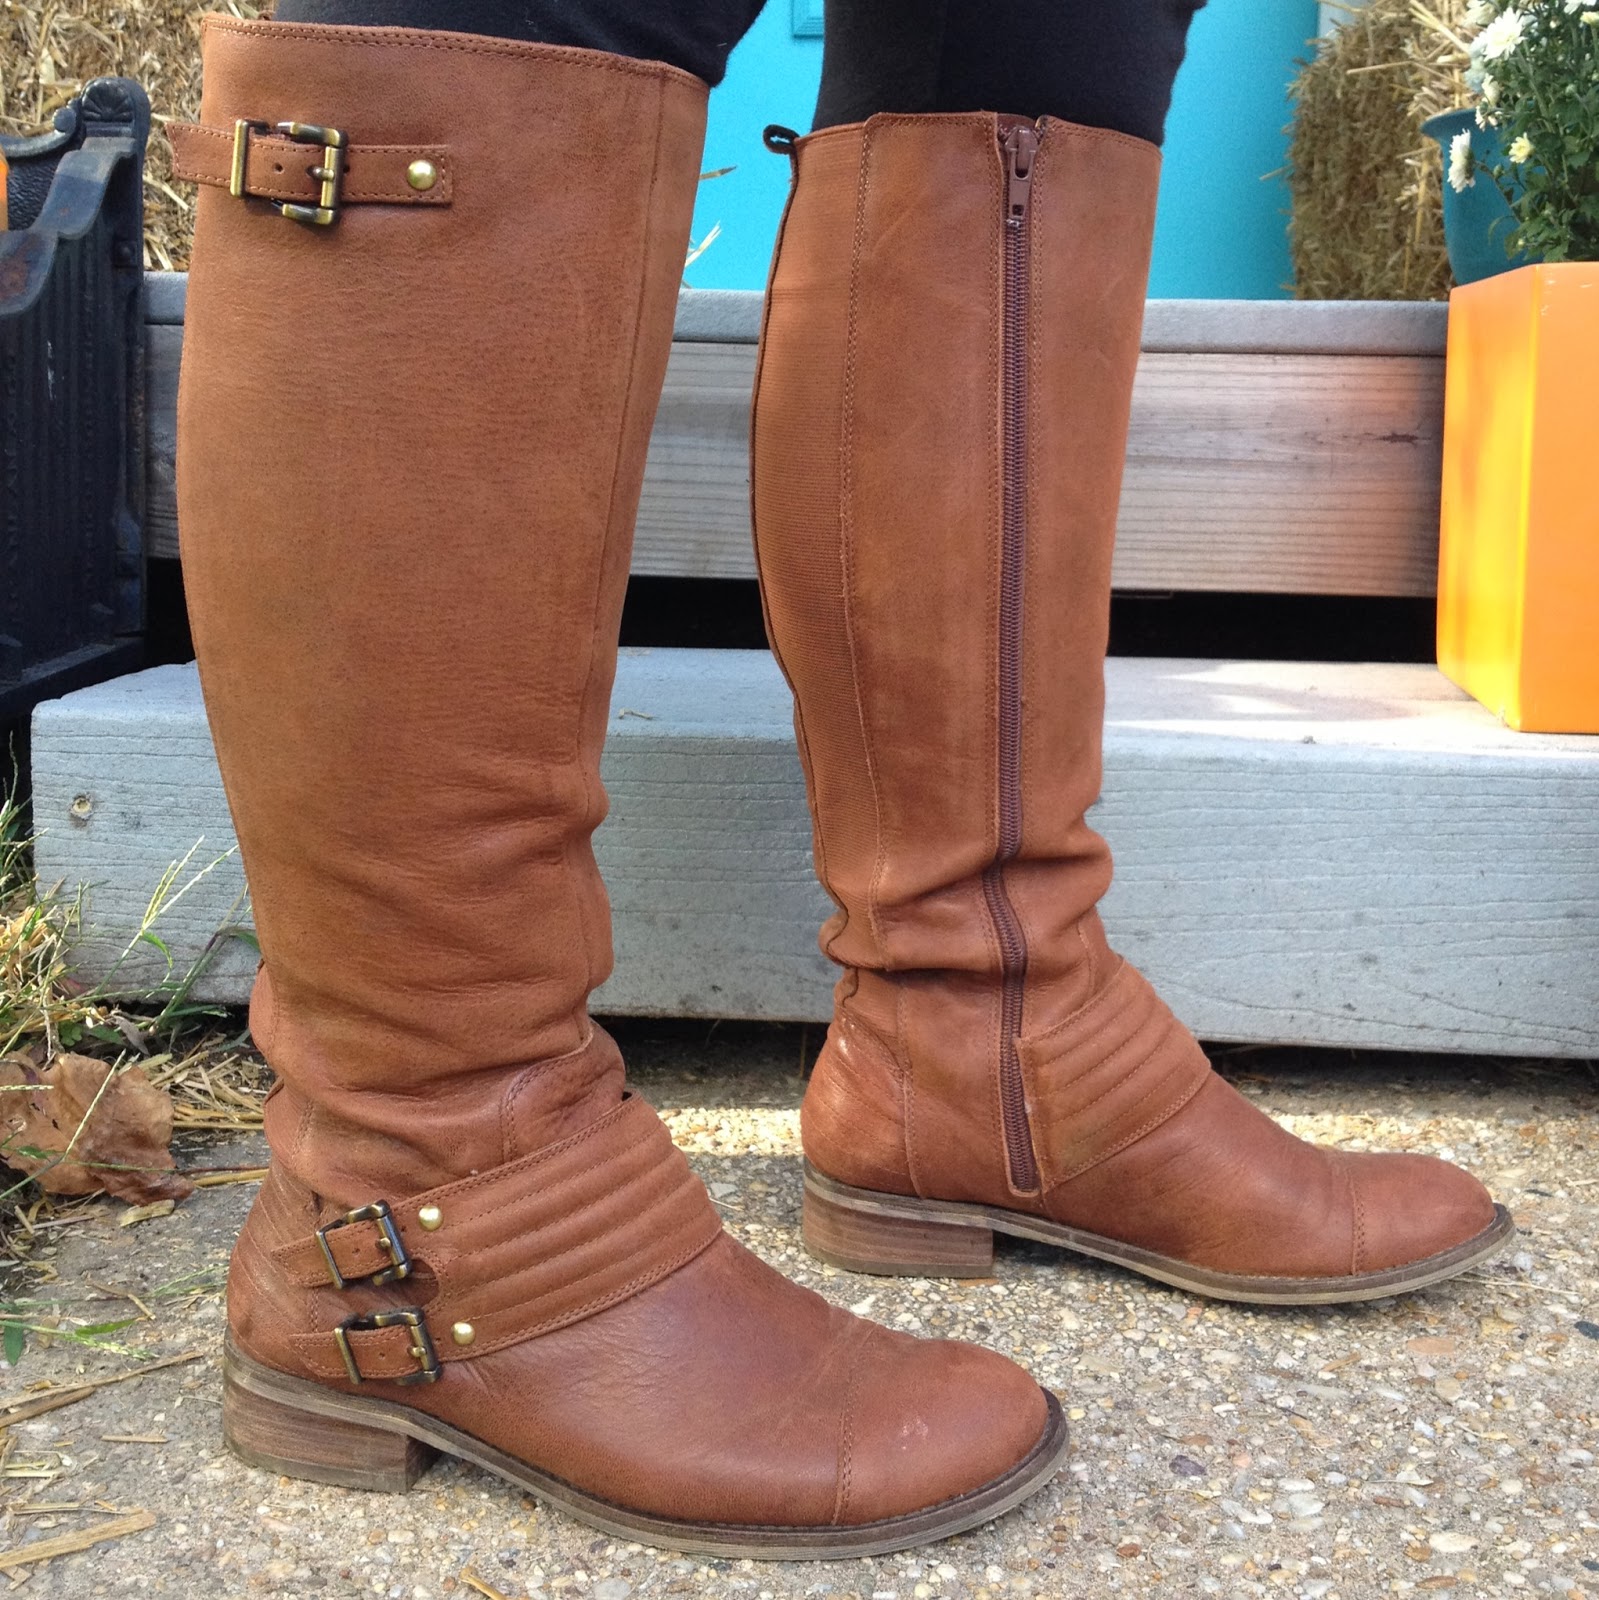 Lola, Tangled: Wide Calf Boots Buying Guide